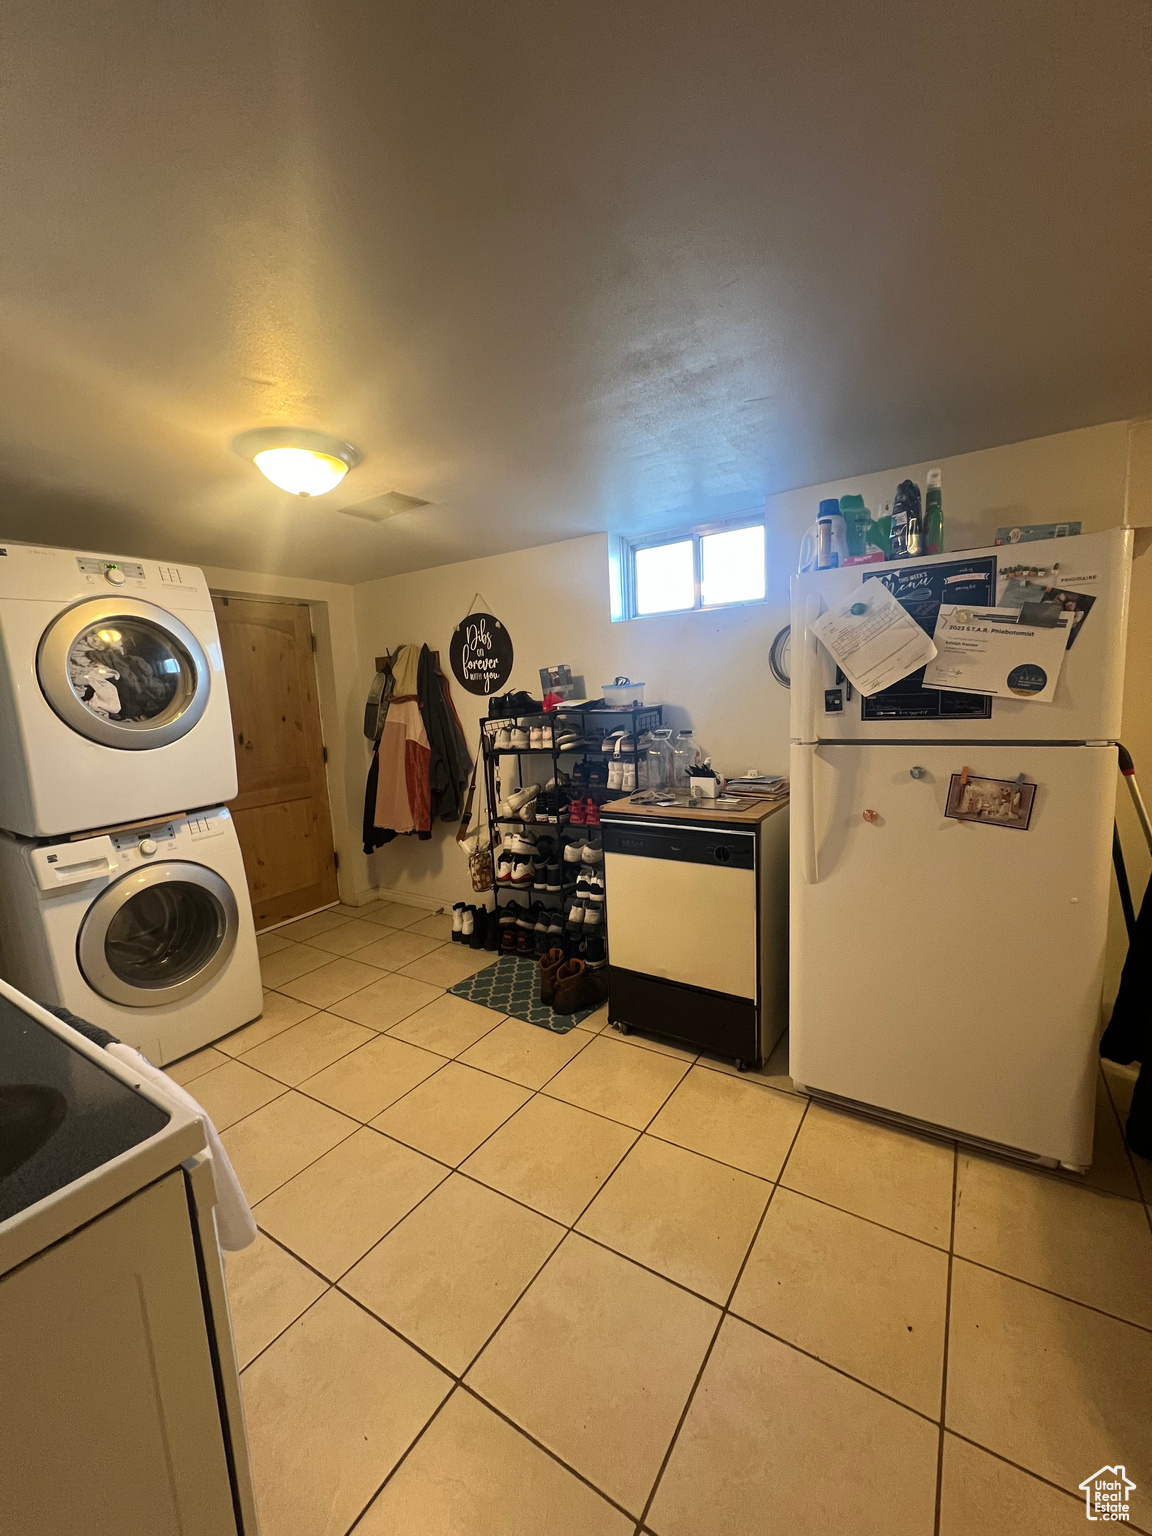 Kitchen featuring white appliances, light tile floors, and stacked washer and dryer